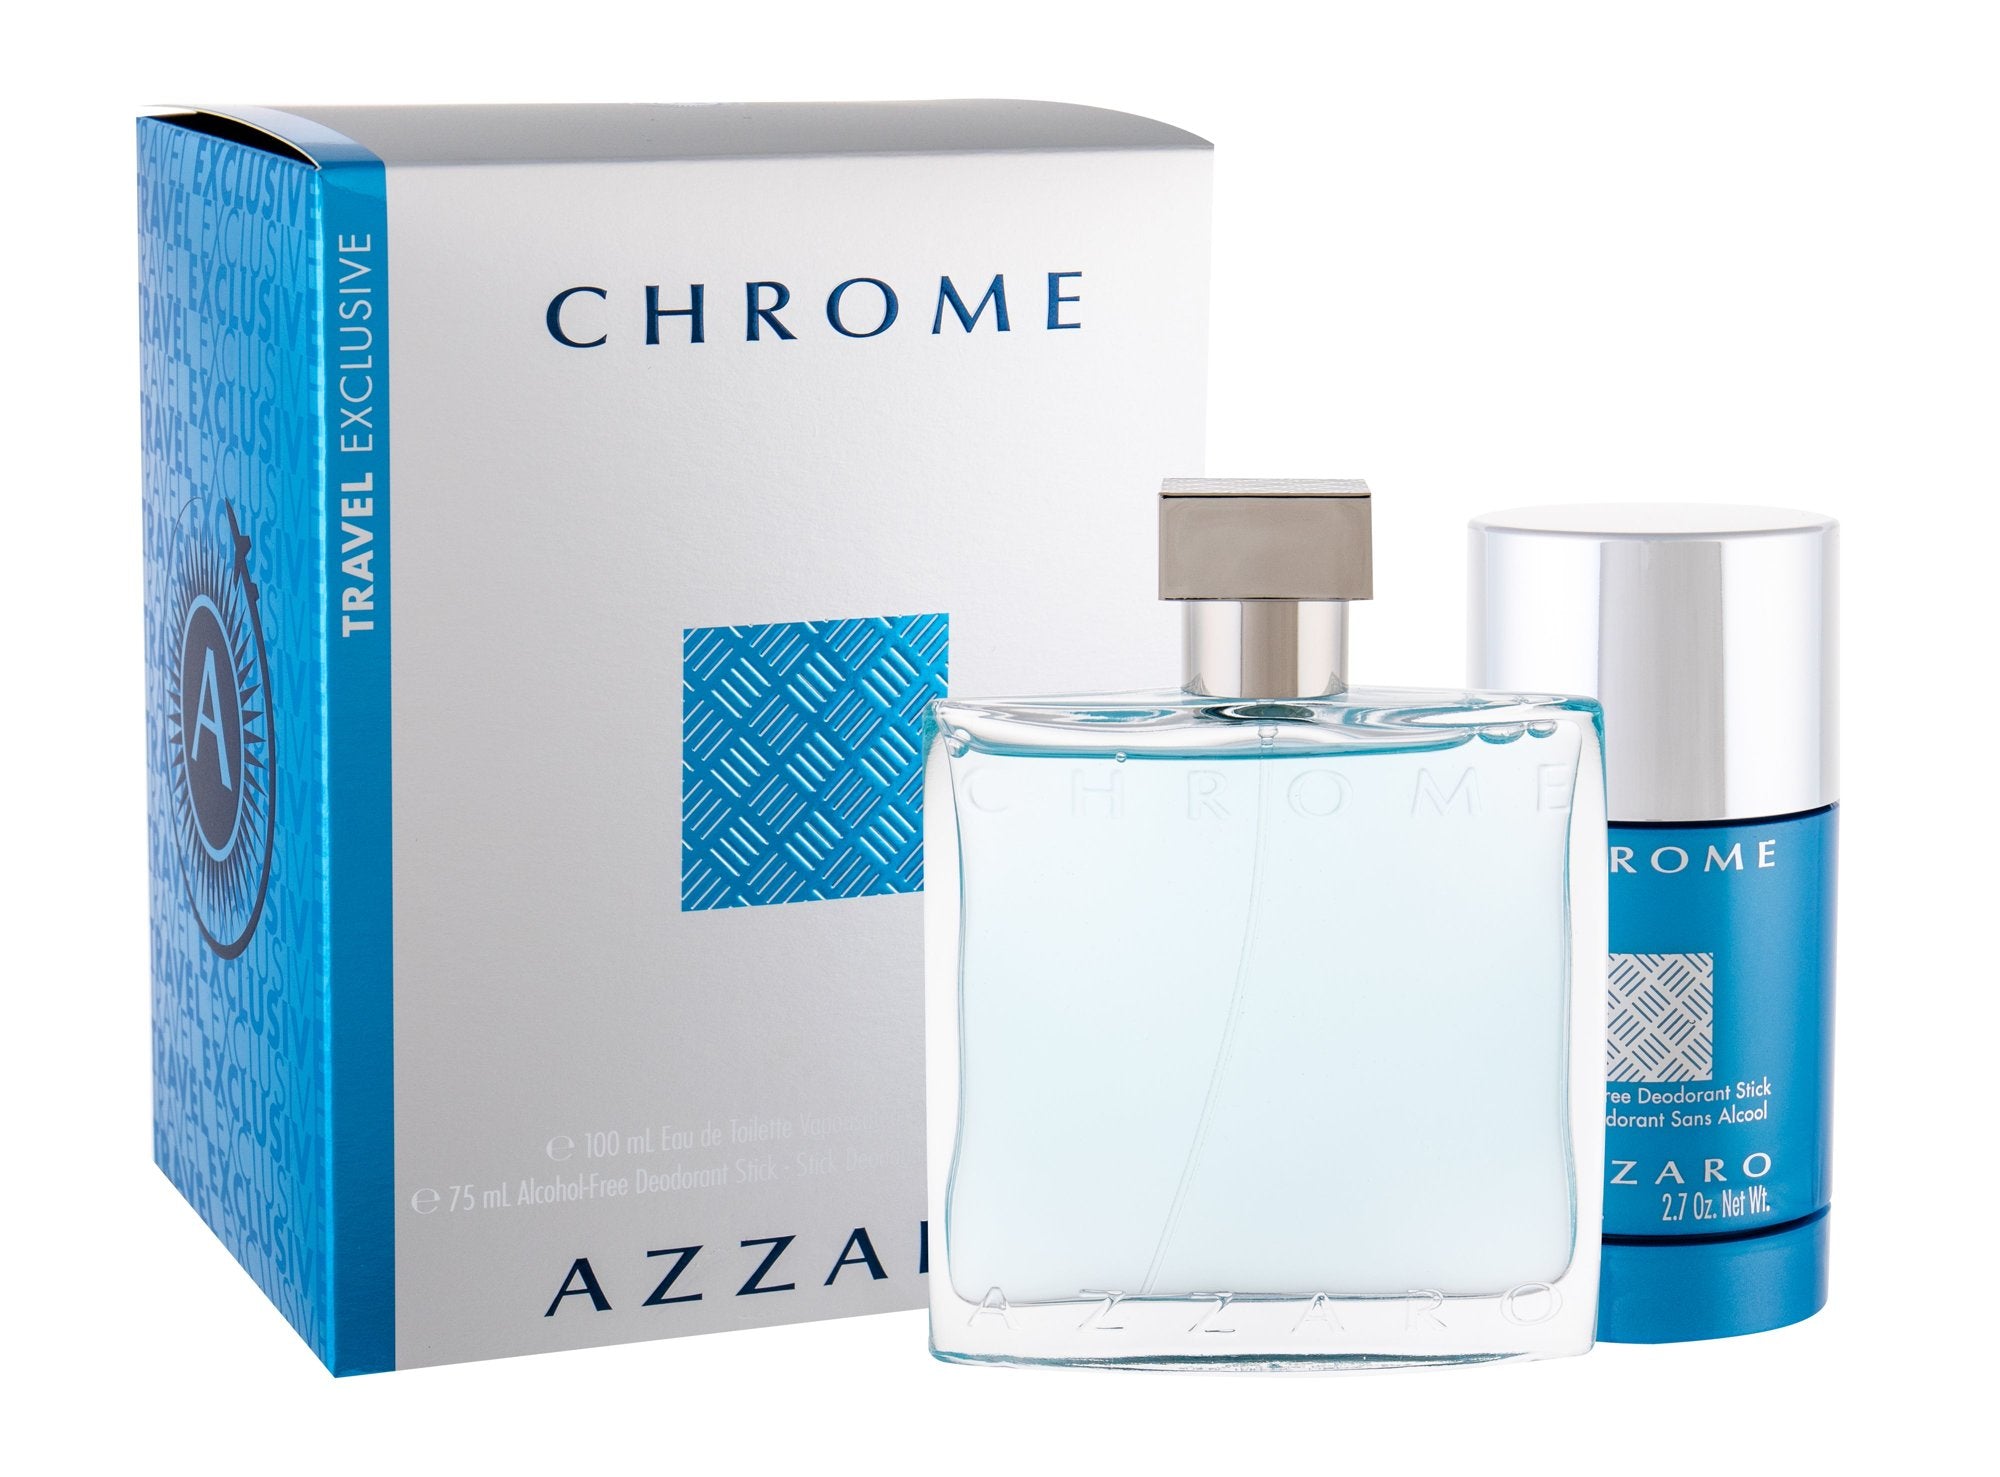 Cierra Perfumes - Azzaro Chrome Extreme - Eau de Parfum, 100 ml + Deodorant  Stick, 75 ml Gift Set Launched in 2020, this brilliant fragrance opens with  sharp notes of Green Mandarin.